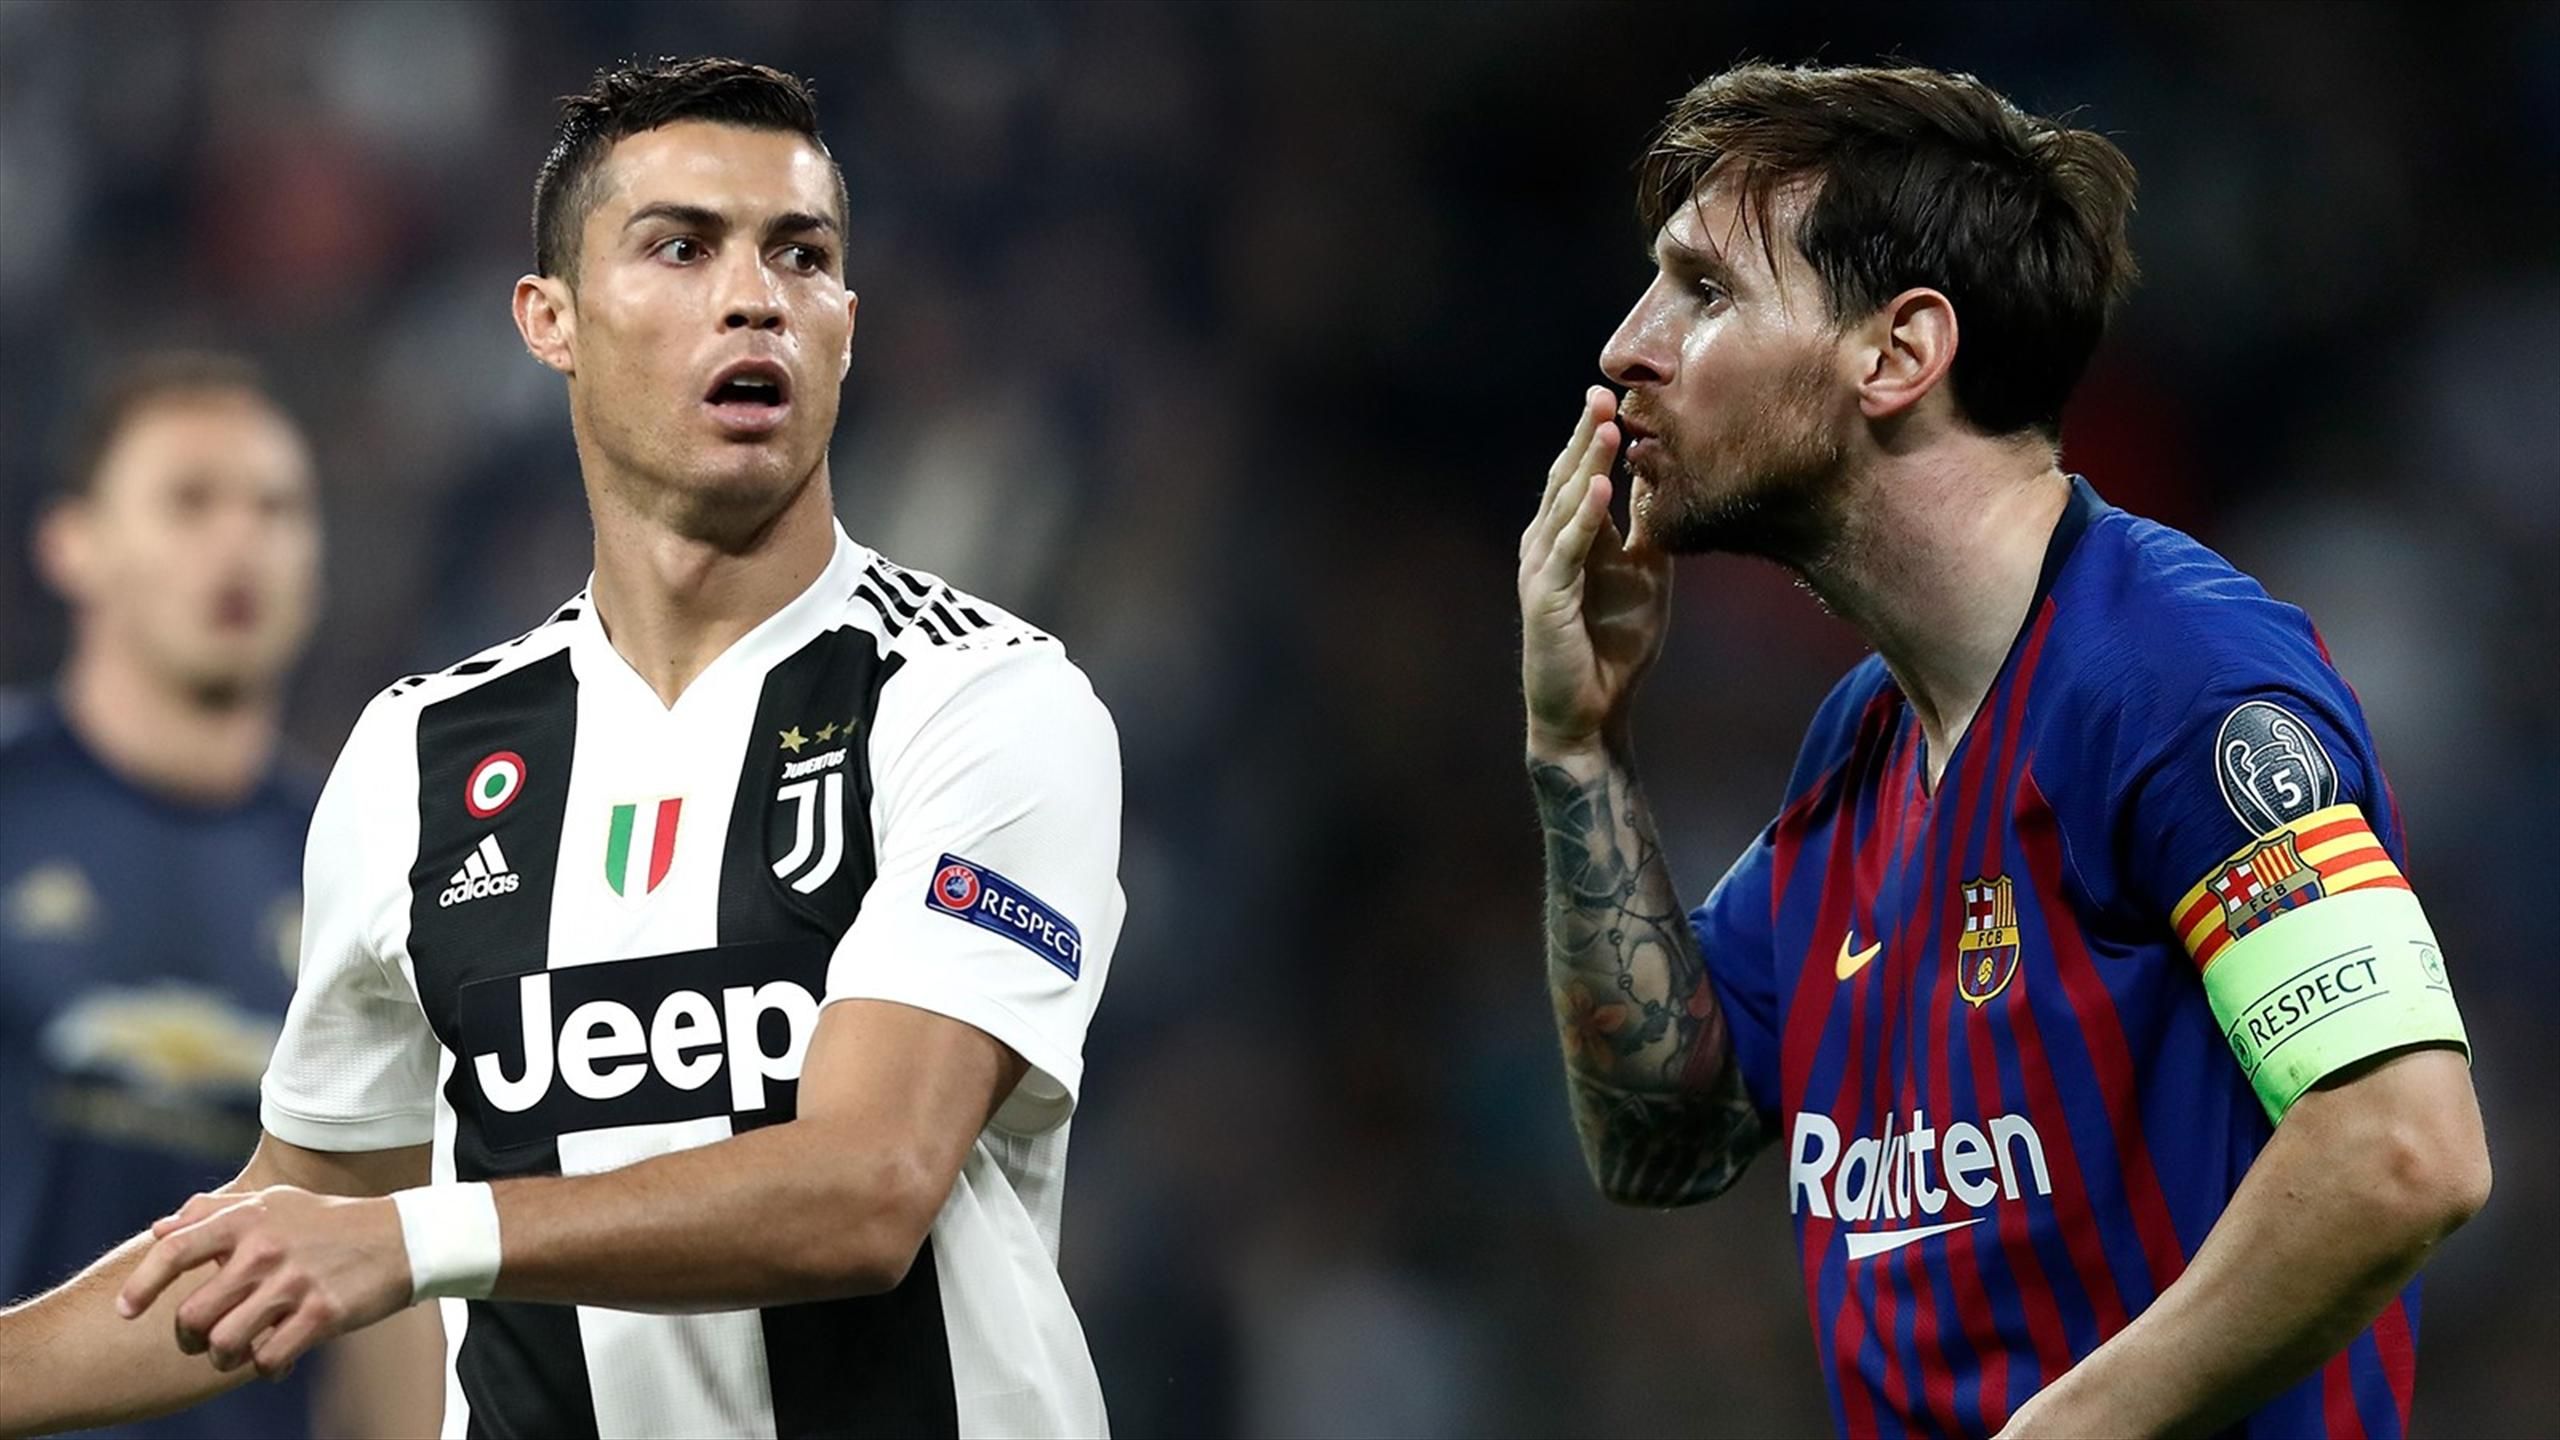 Cristiano Ronaldo Shares Picture With Lionel Messi. Don't Miss The